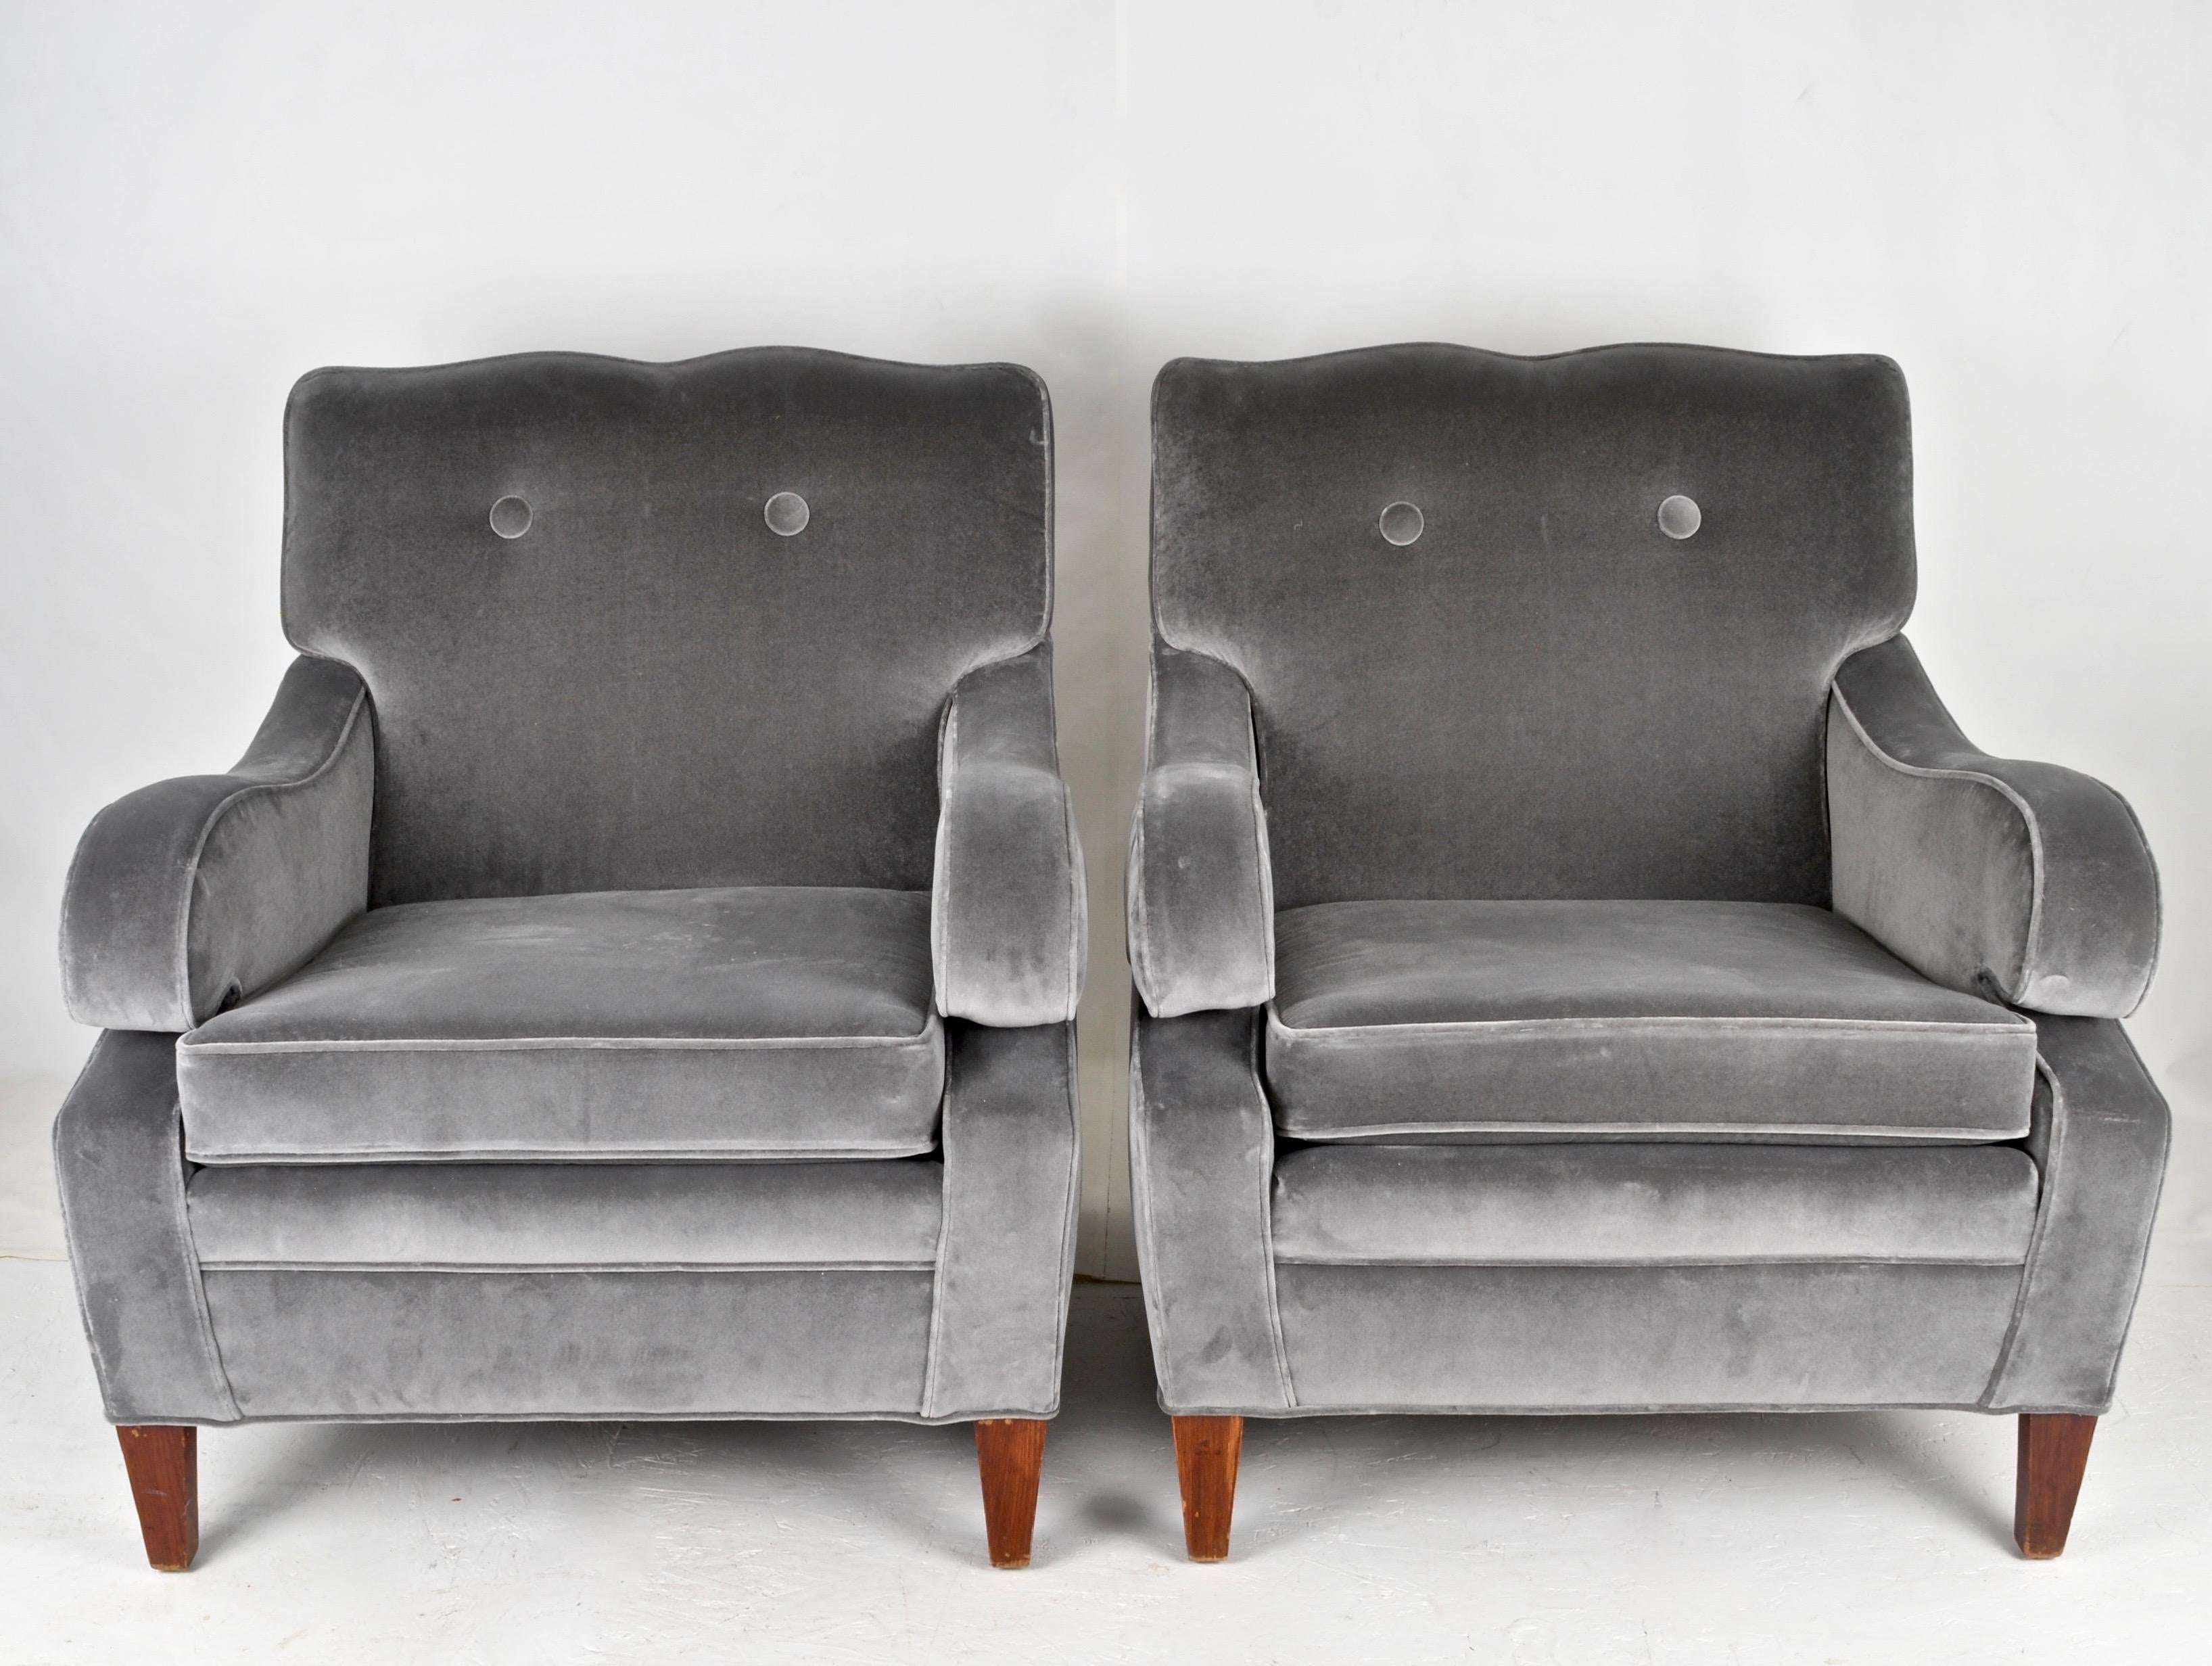 Newly upholstered in grey velvet, a pair of club chairs with stylish details. Note arms and back with typical Dorothy Draper style curves. Large scale, very comfortable. Seat cushion is firm but not hard.